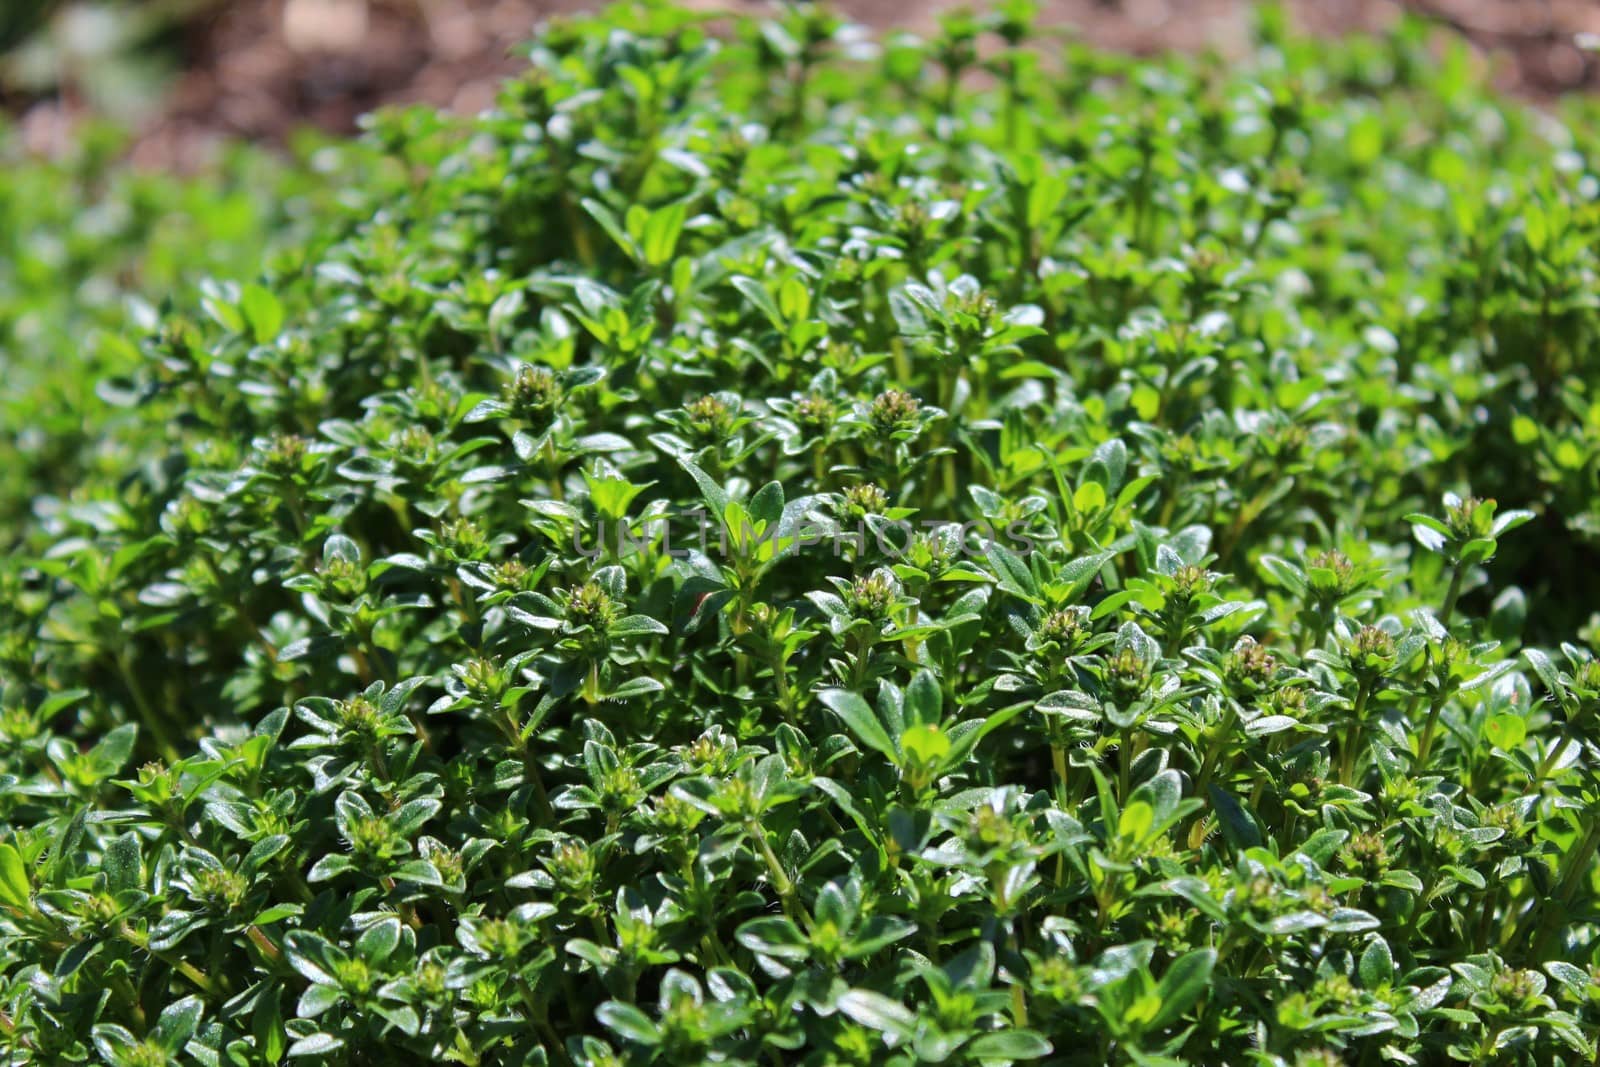 The picture shows a field of thyme in the garden